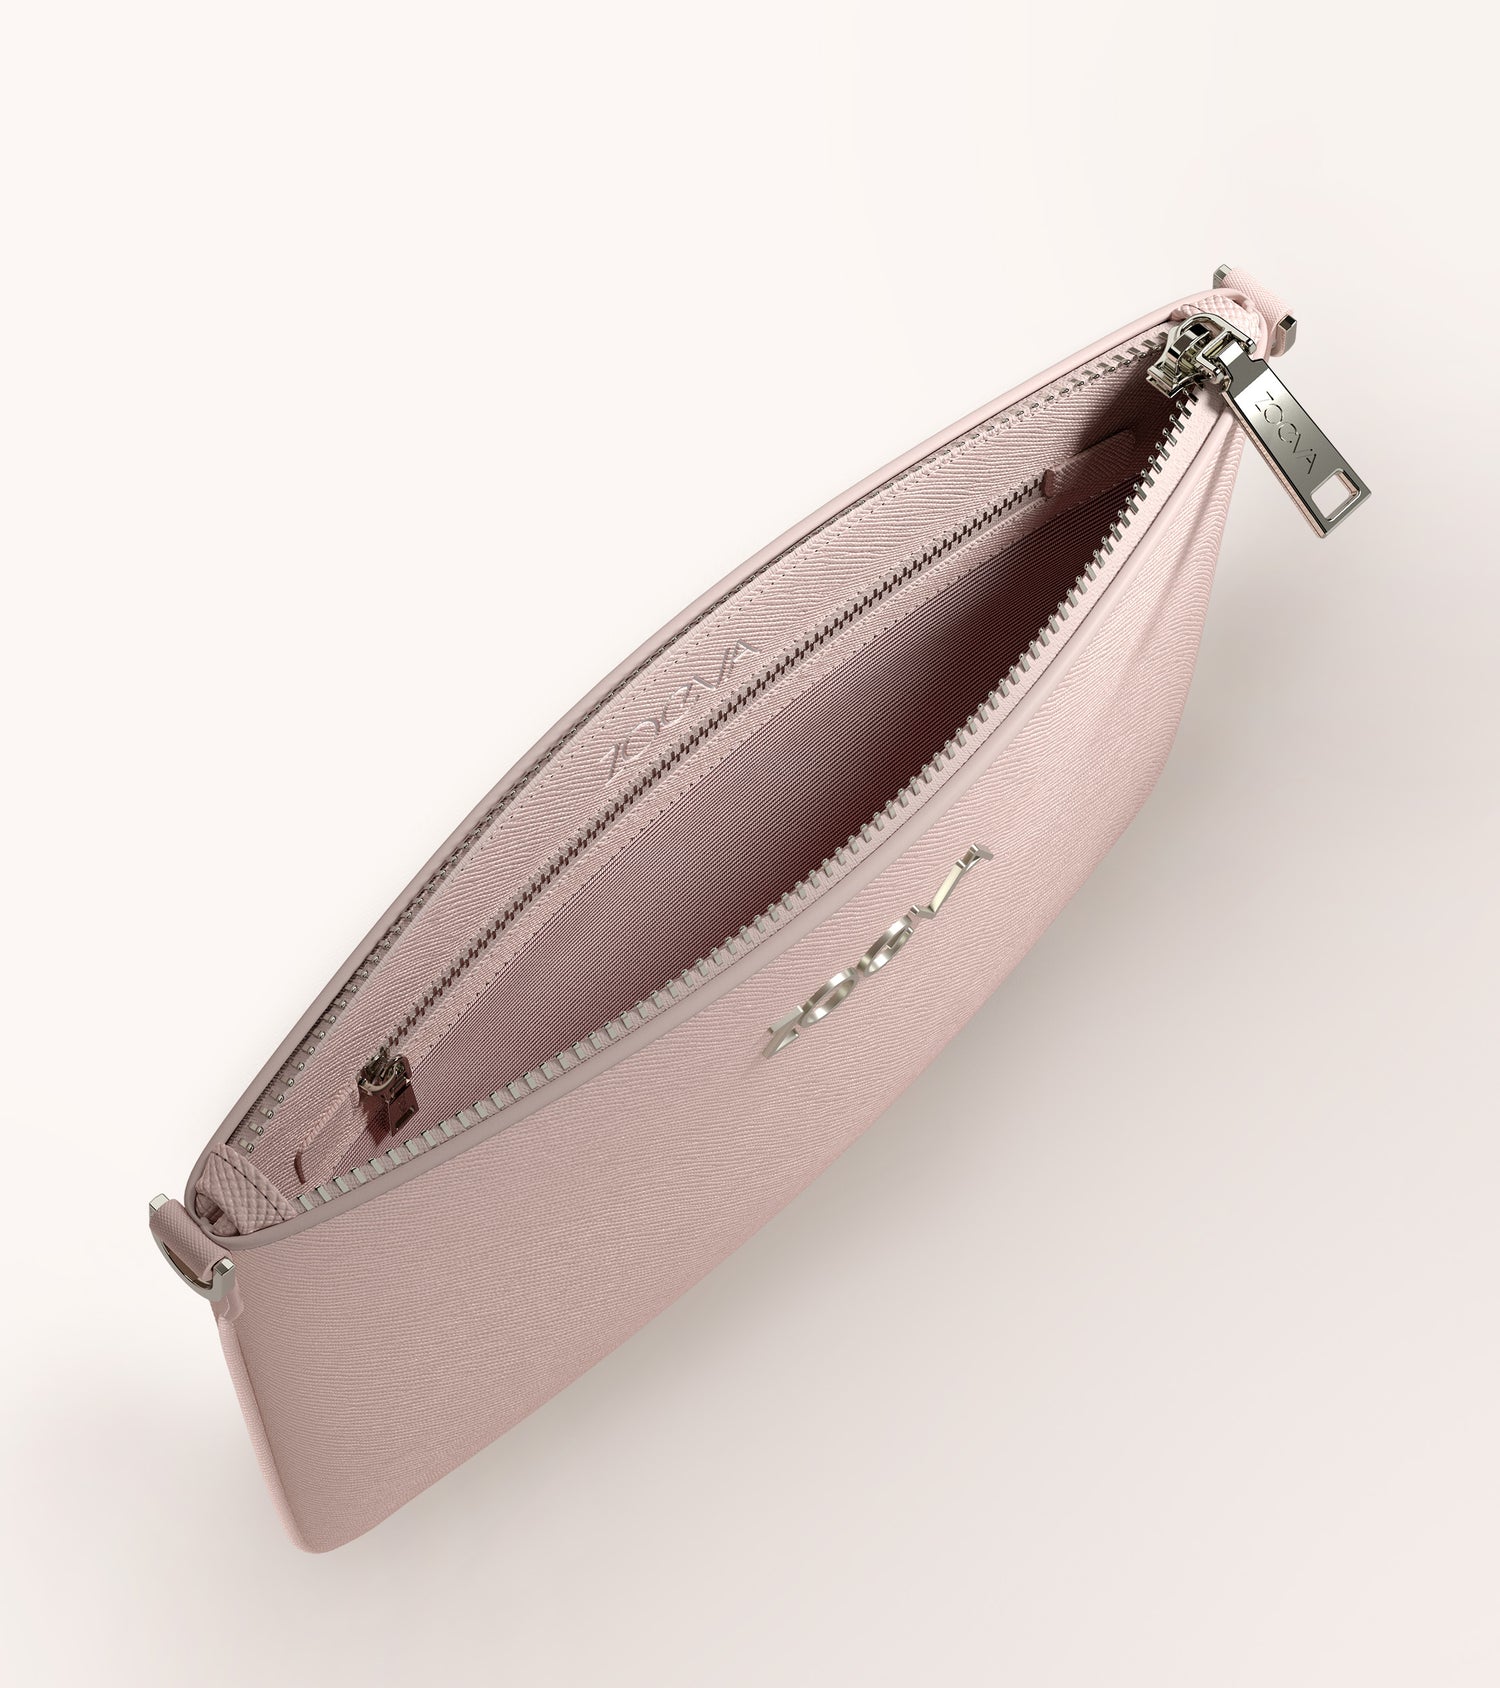 ZOEVA - The Everyday Clutch (DUSTY ROSE) - ACCESSORIES